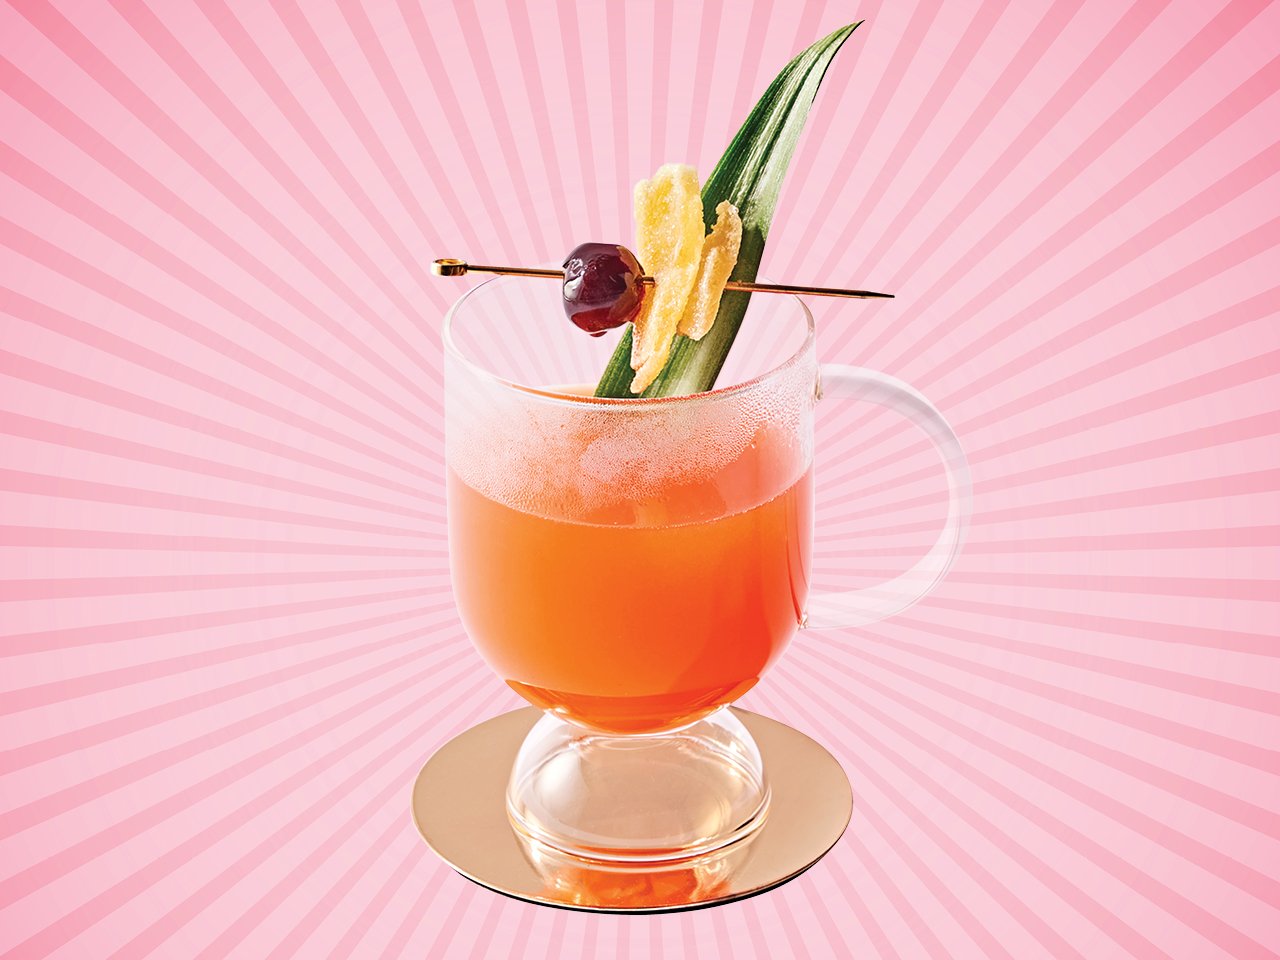 a glass mug with a pink hot drink inside garnished with a pineapple spear and a cherry